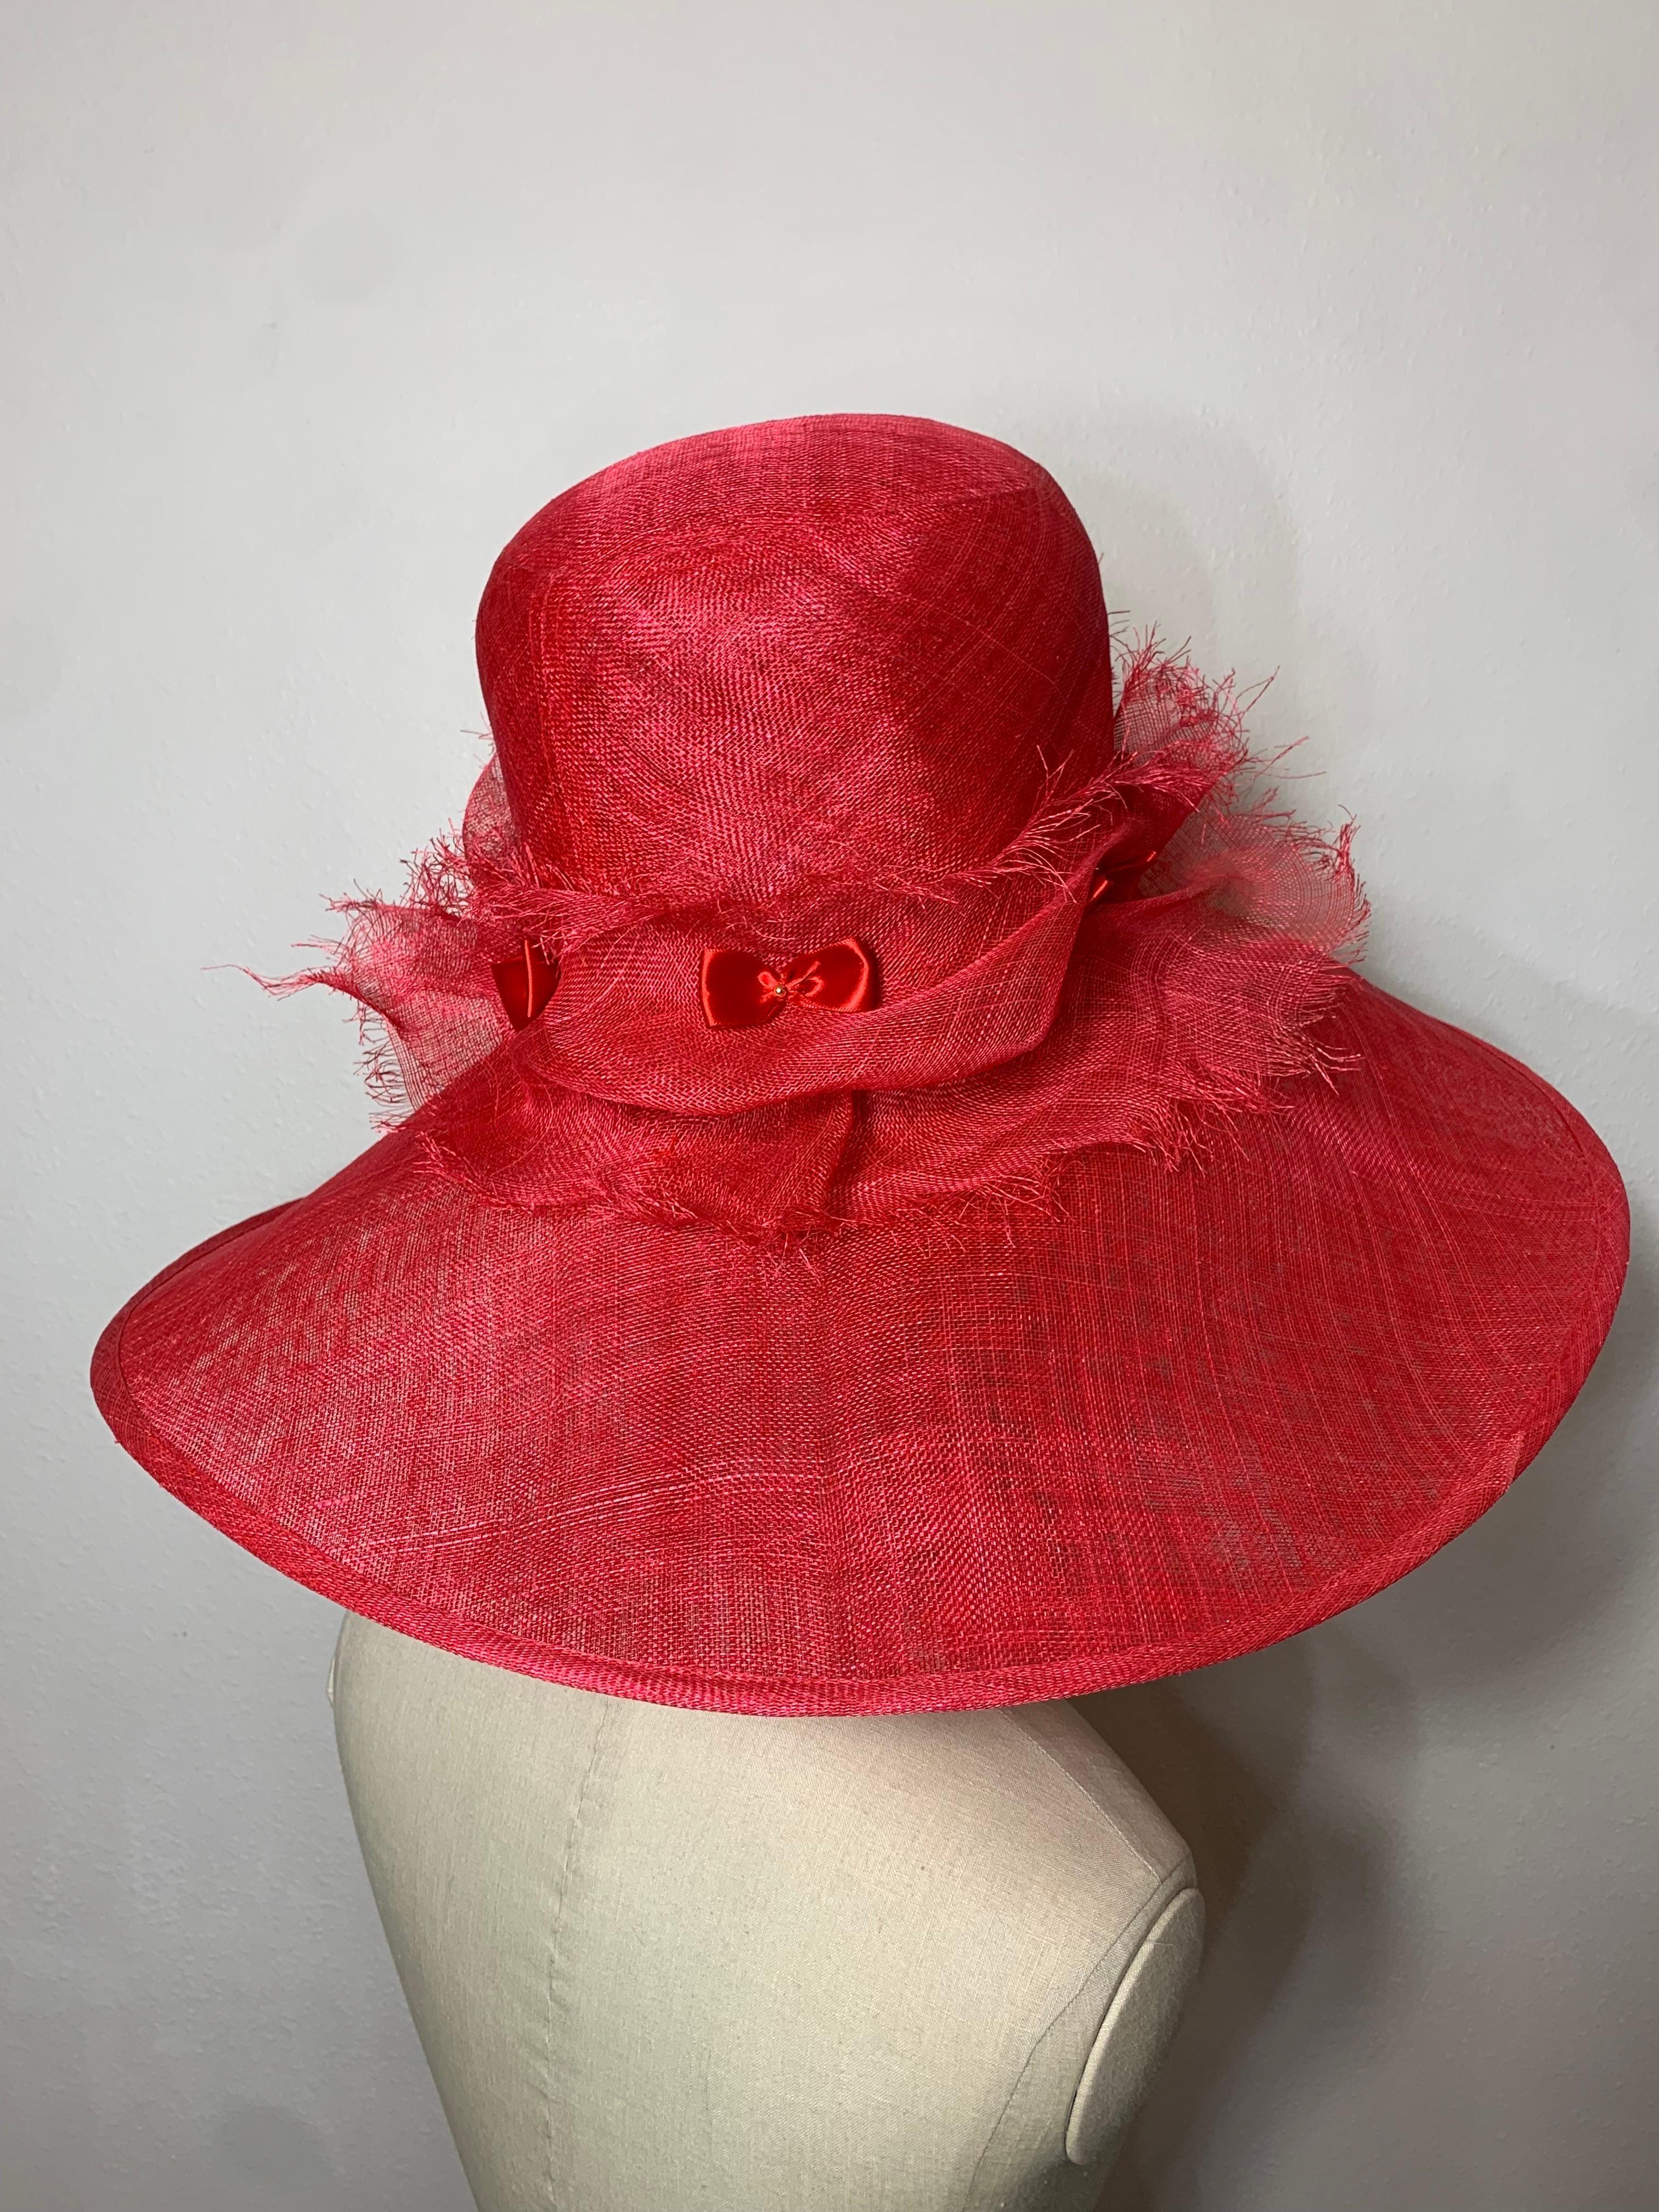 Maison Michel Spring / Summer Cardinal Red Sheer Straw Wide Brim Tall Crown Hat w Frayed Straw Band and Red Satin Bows: Downturned brim is dramatic and can be seen through. Can also be flipped up for a contrasting look. Brim measures 23